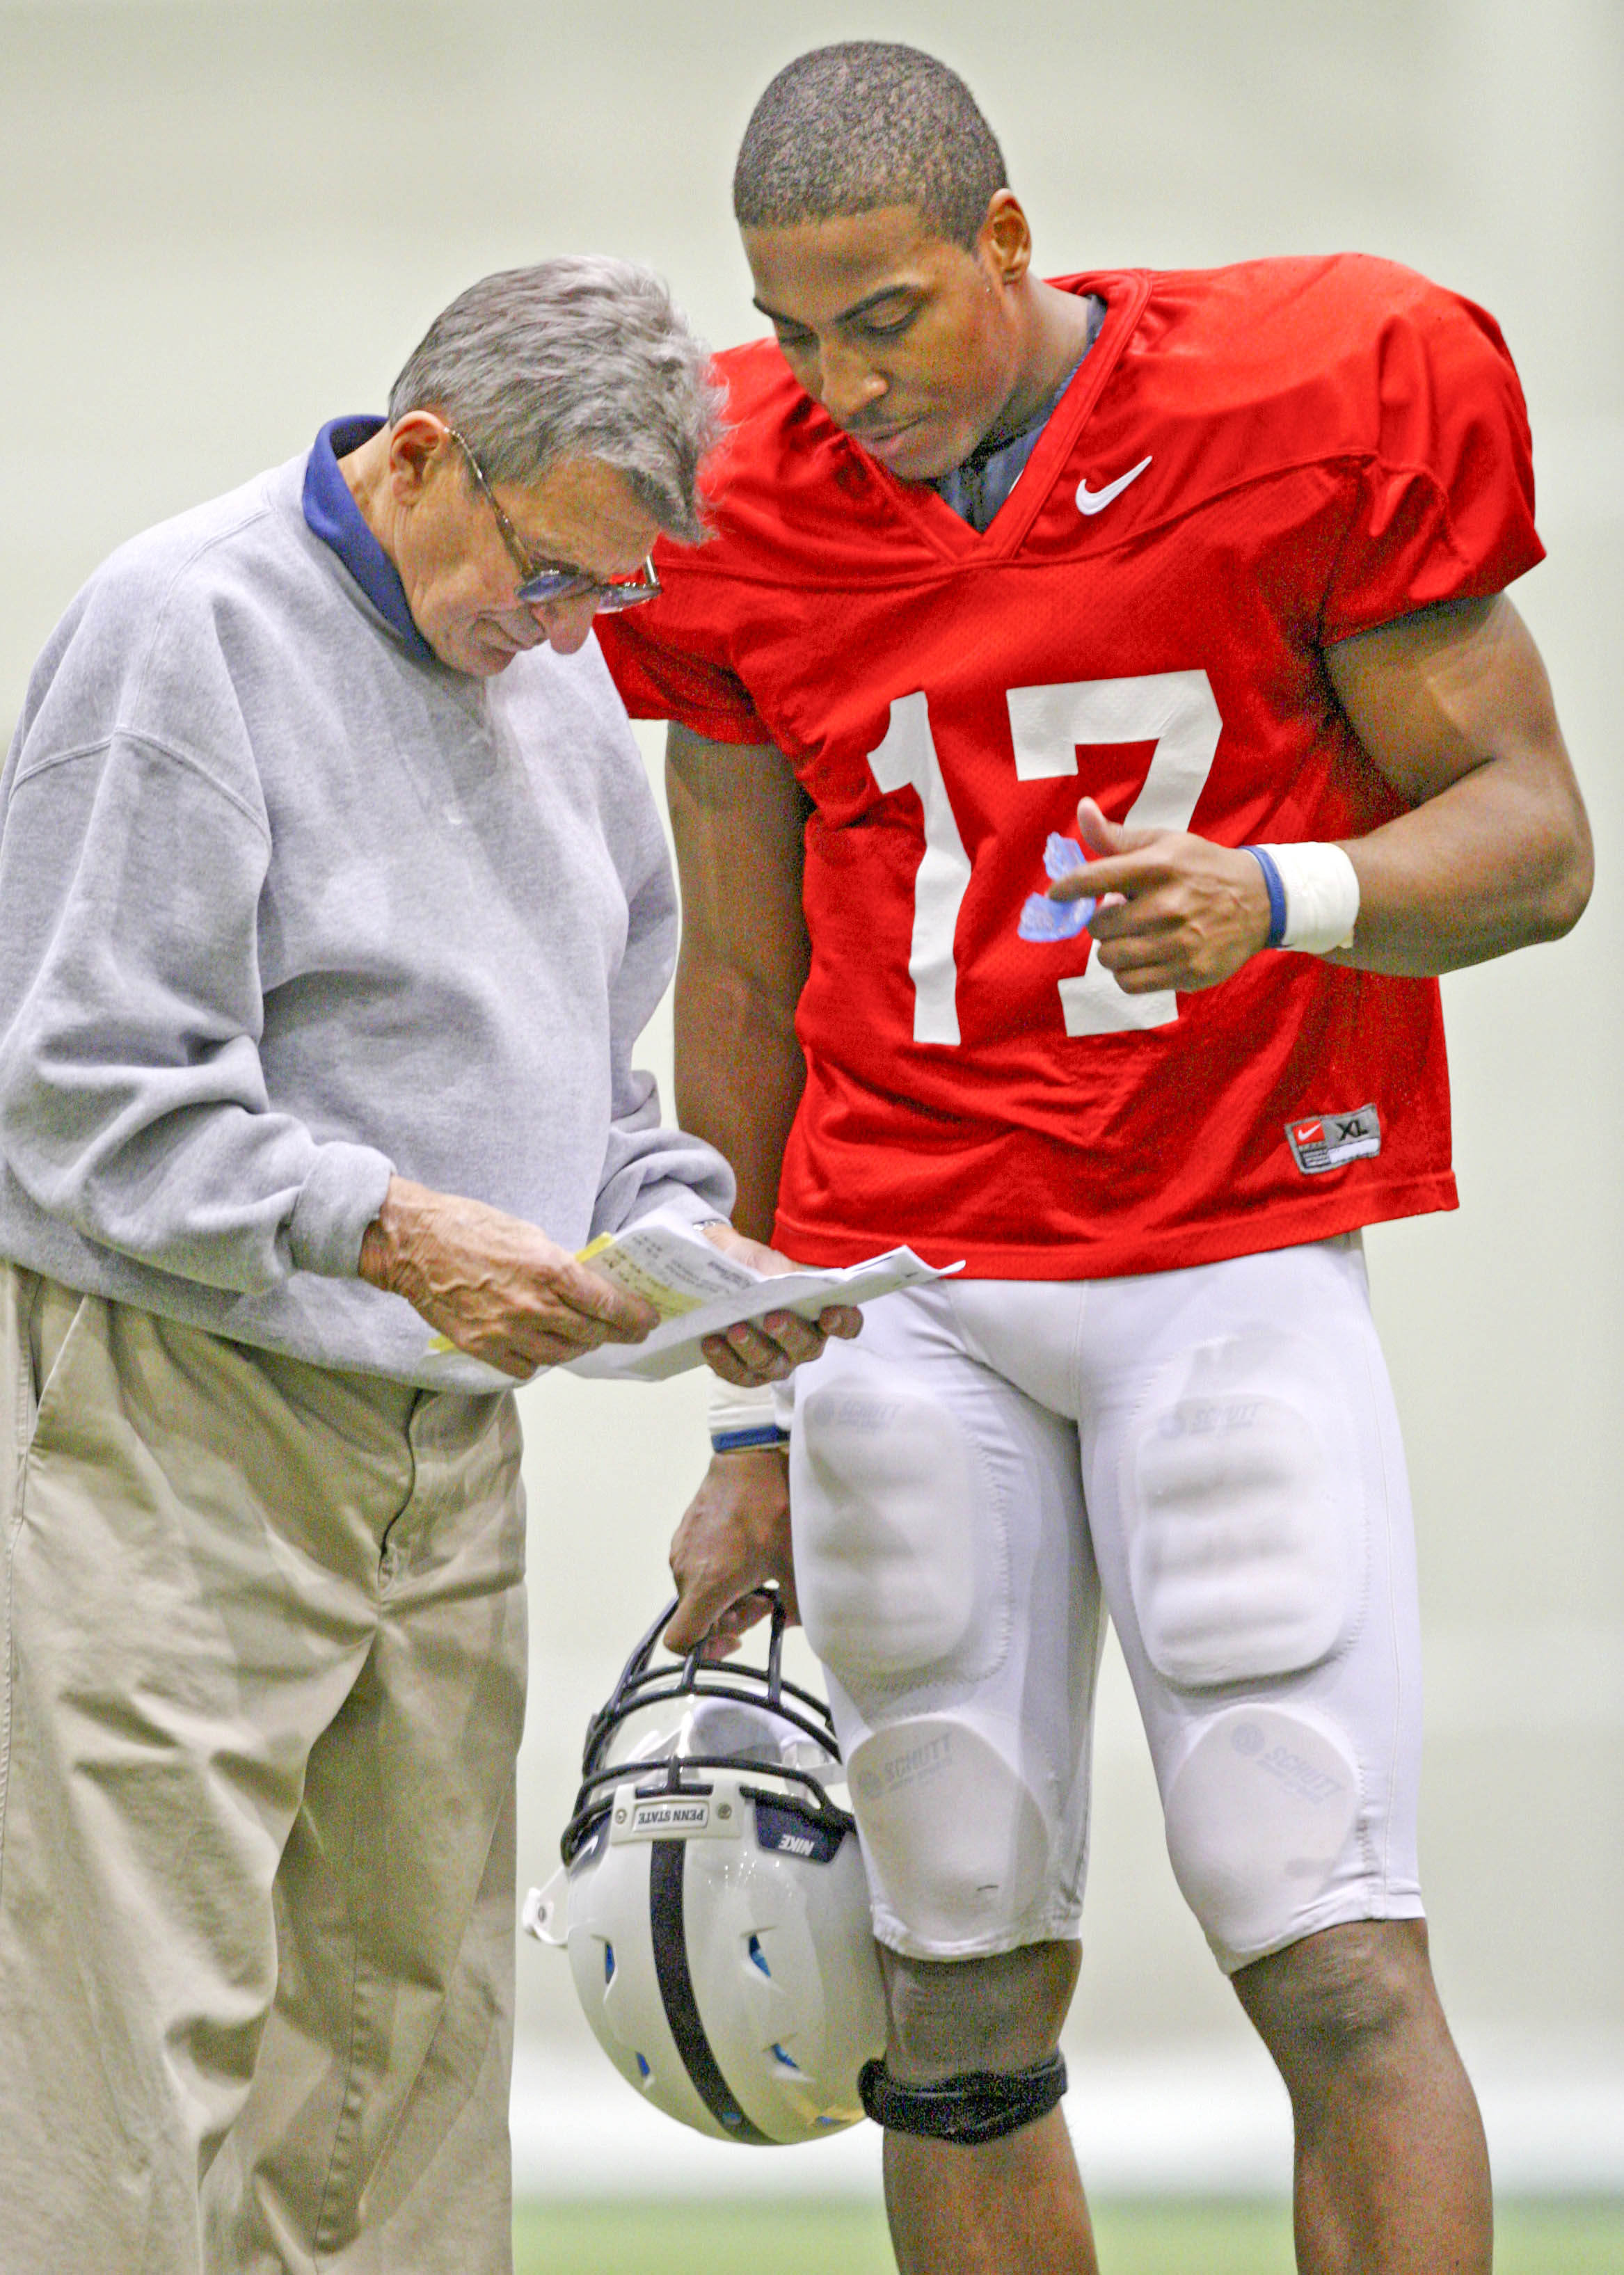 Penn State coach Joe Paterno, left,  talks with quarterback Daryll Clark during a football practice in State College, Pa., Saturday, March 29, 2008. (AP Photo/Carolyn Kaster)